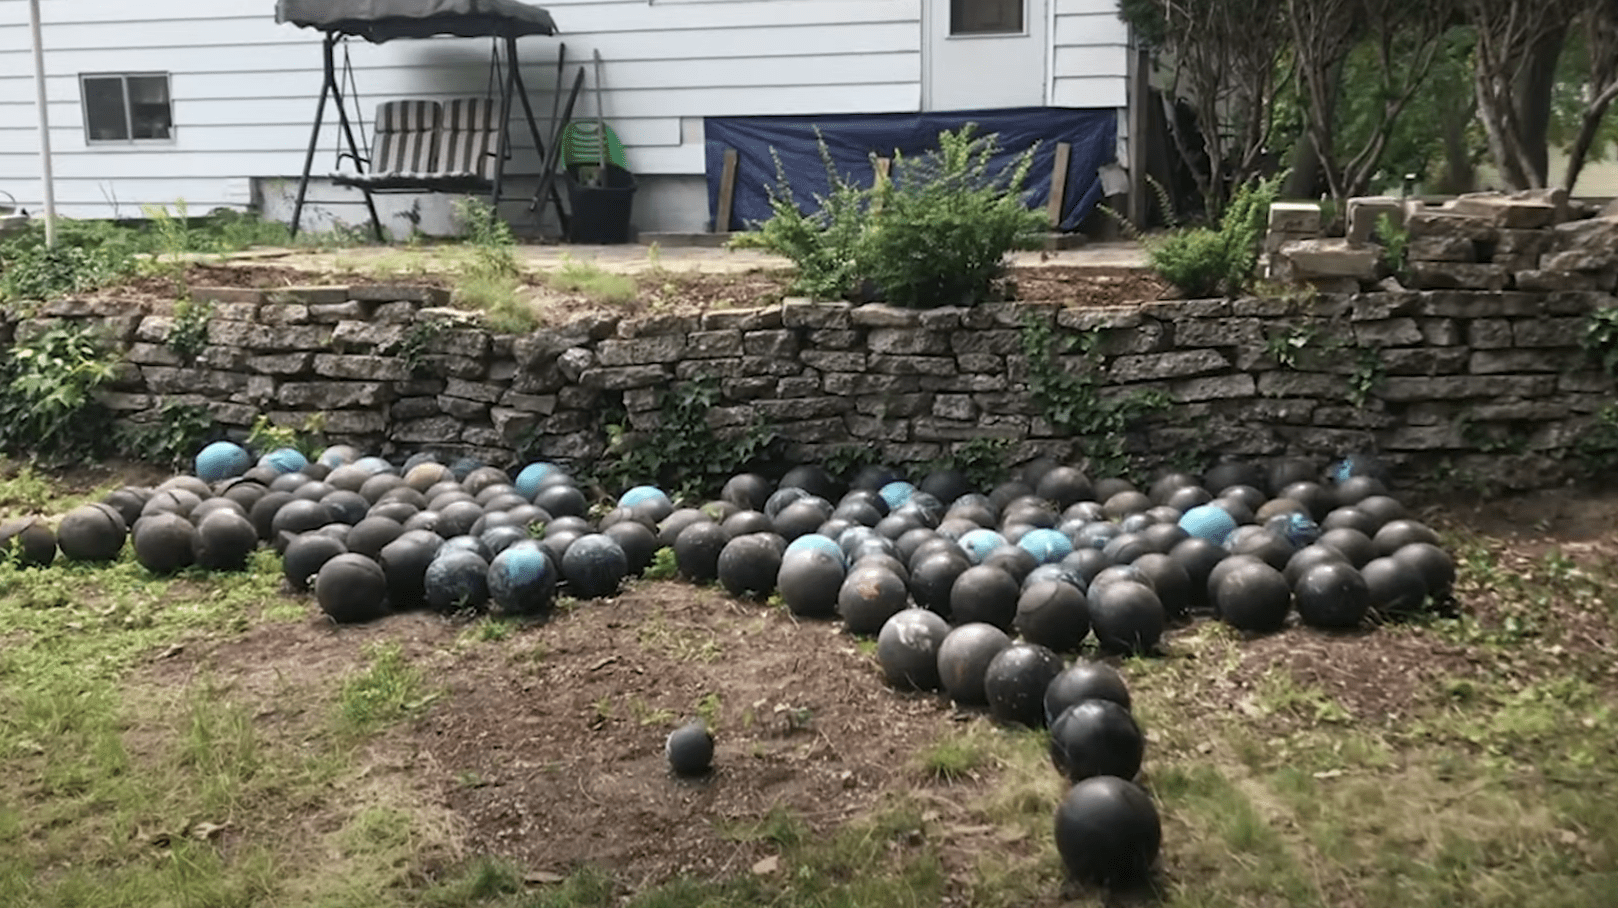 Bowling bowls found under a man's house | Photo: Youtube/mlive